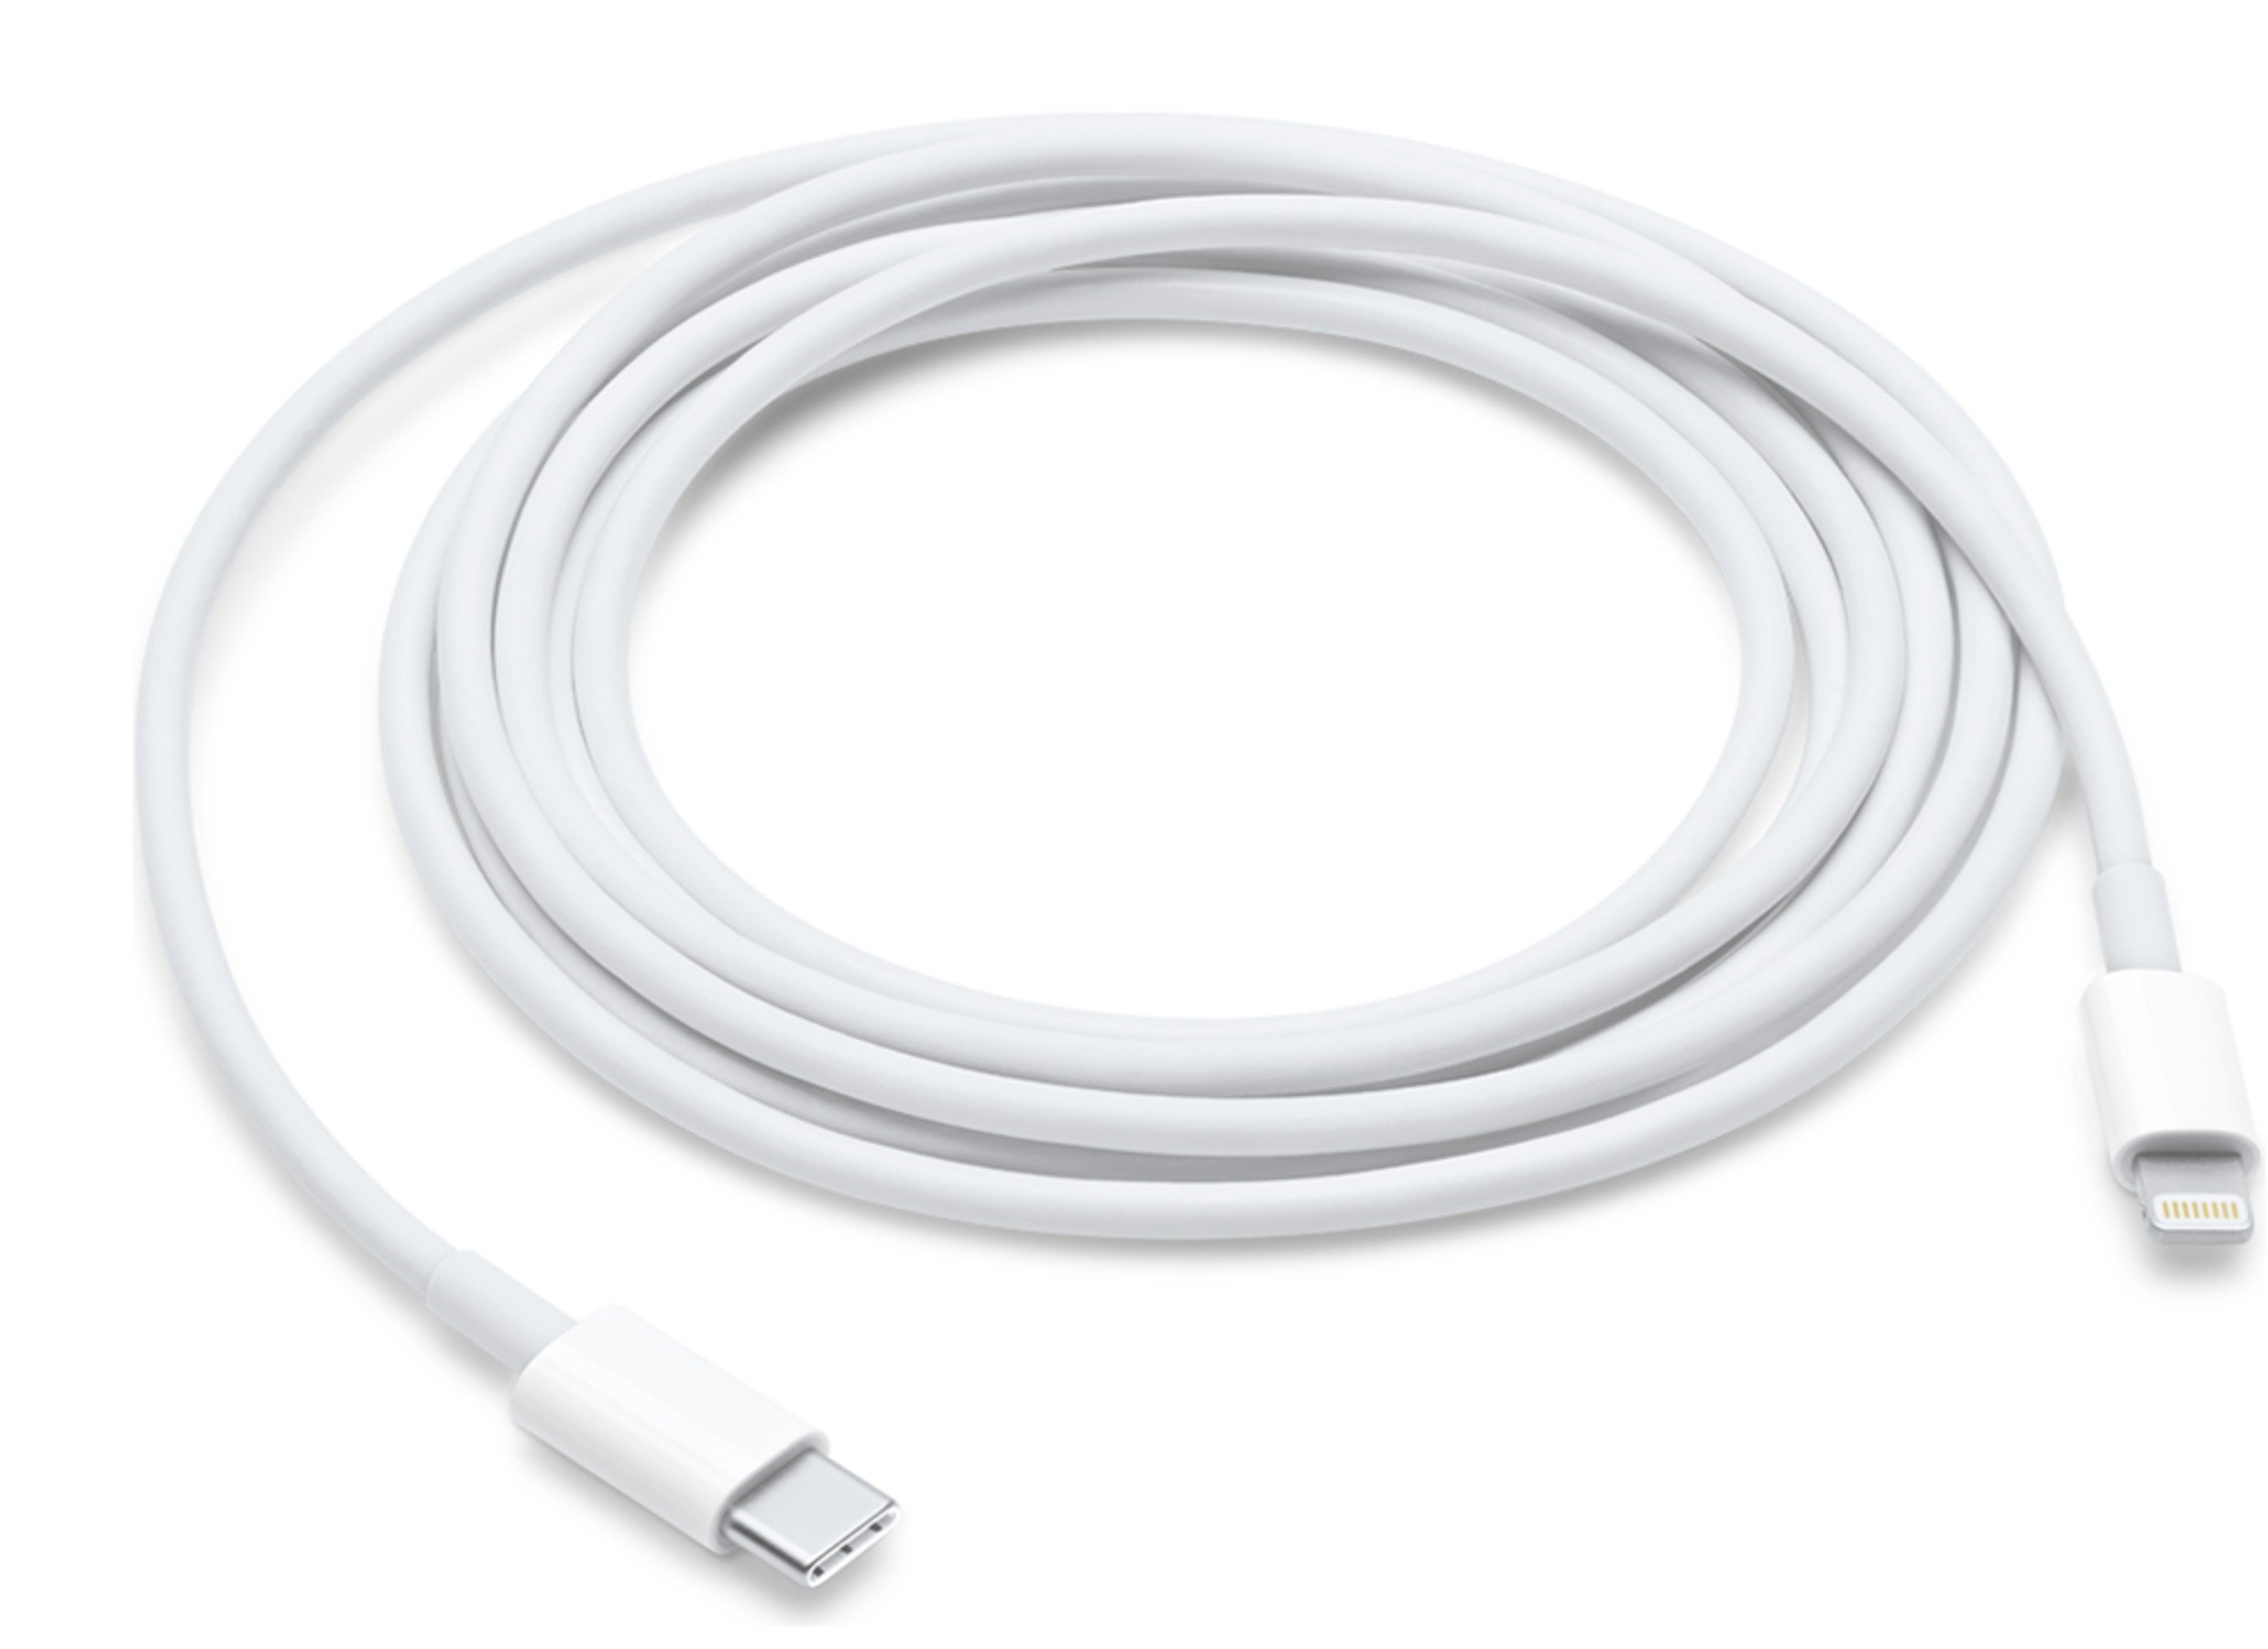 Apple USB-C to Lightning Cable (2m) Review